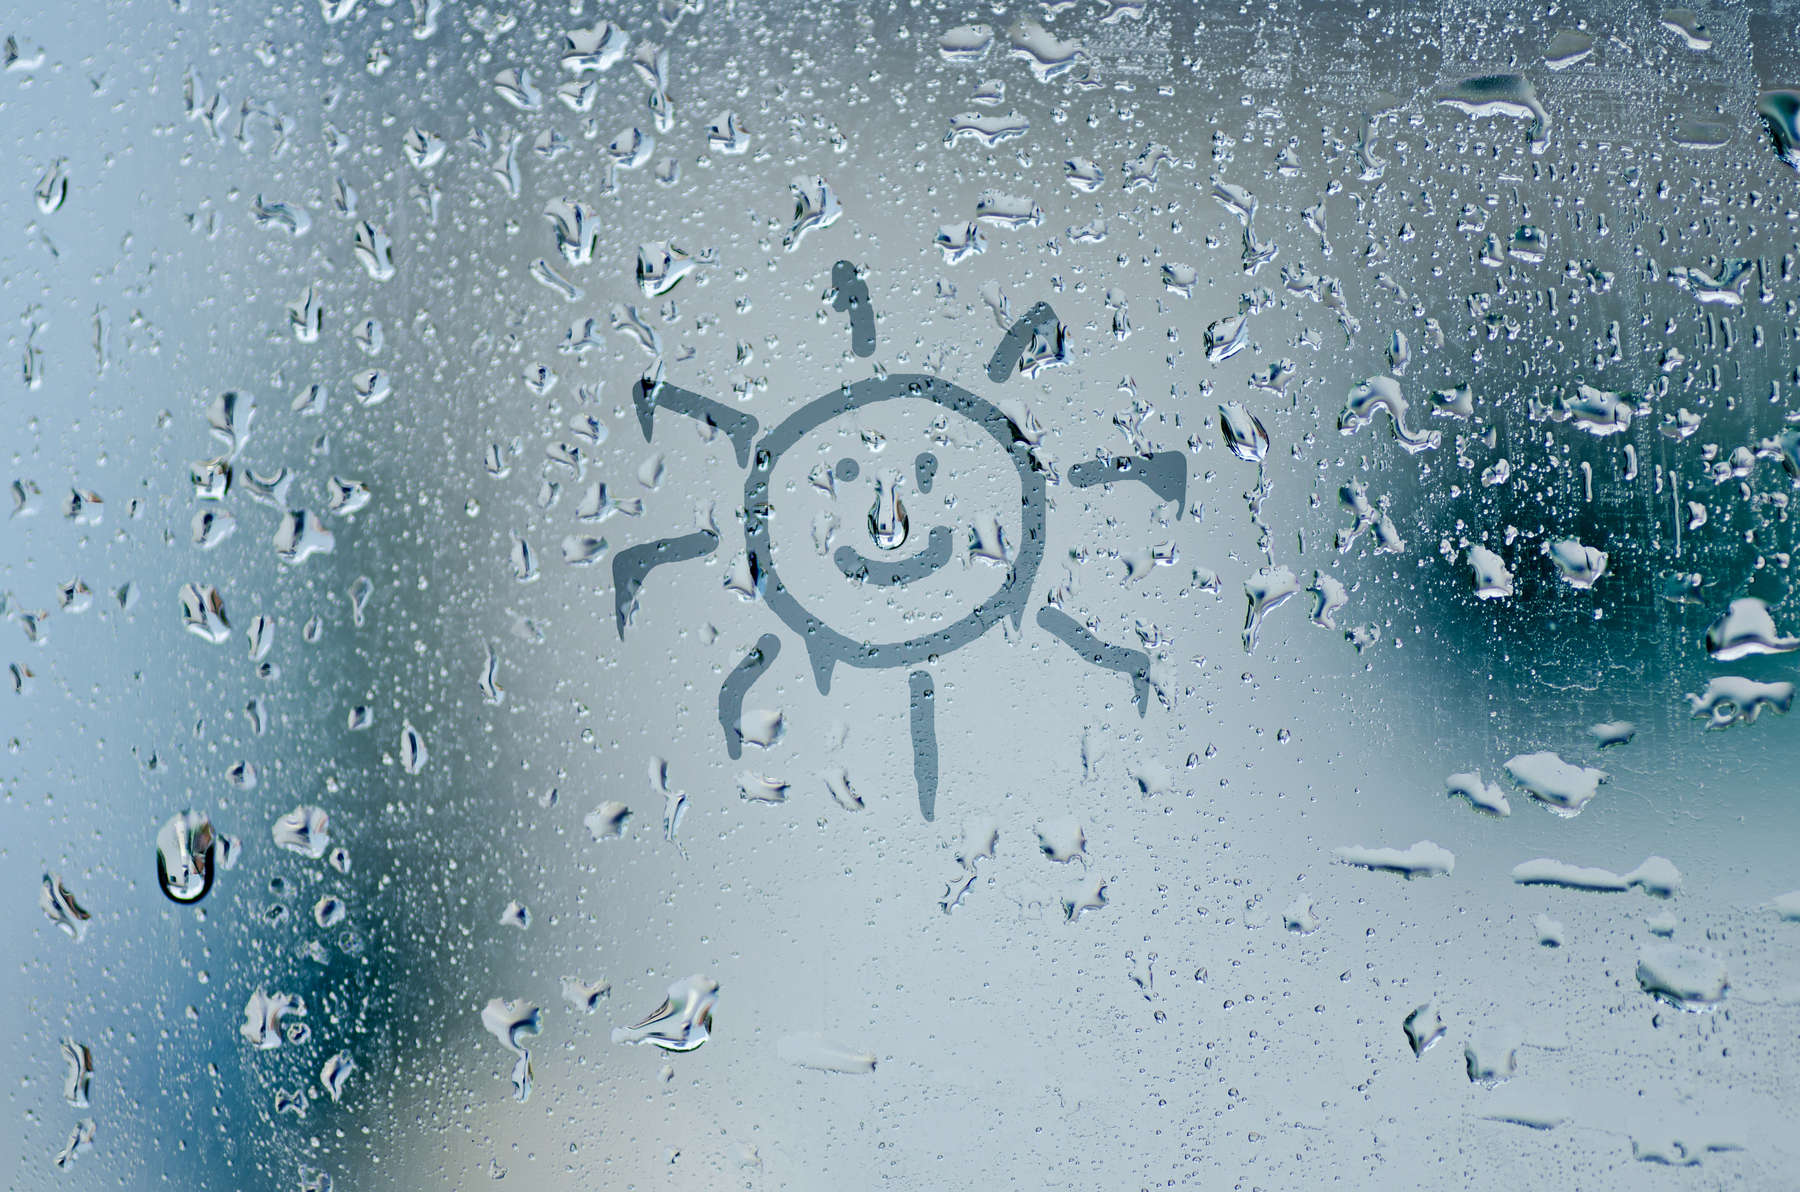 sun sign on natural water drops on glass window background